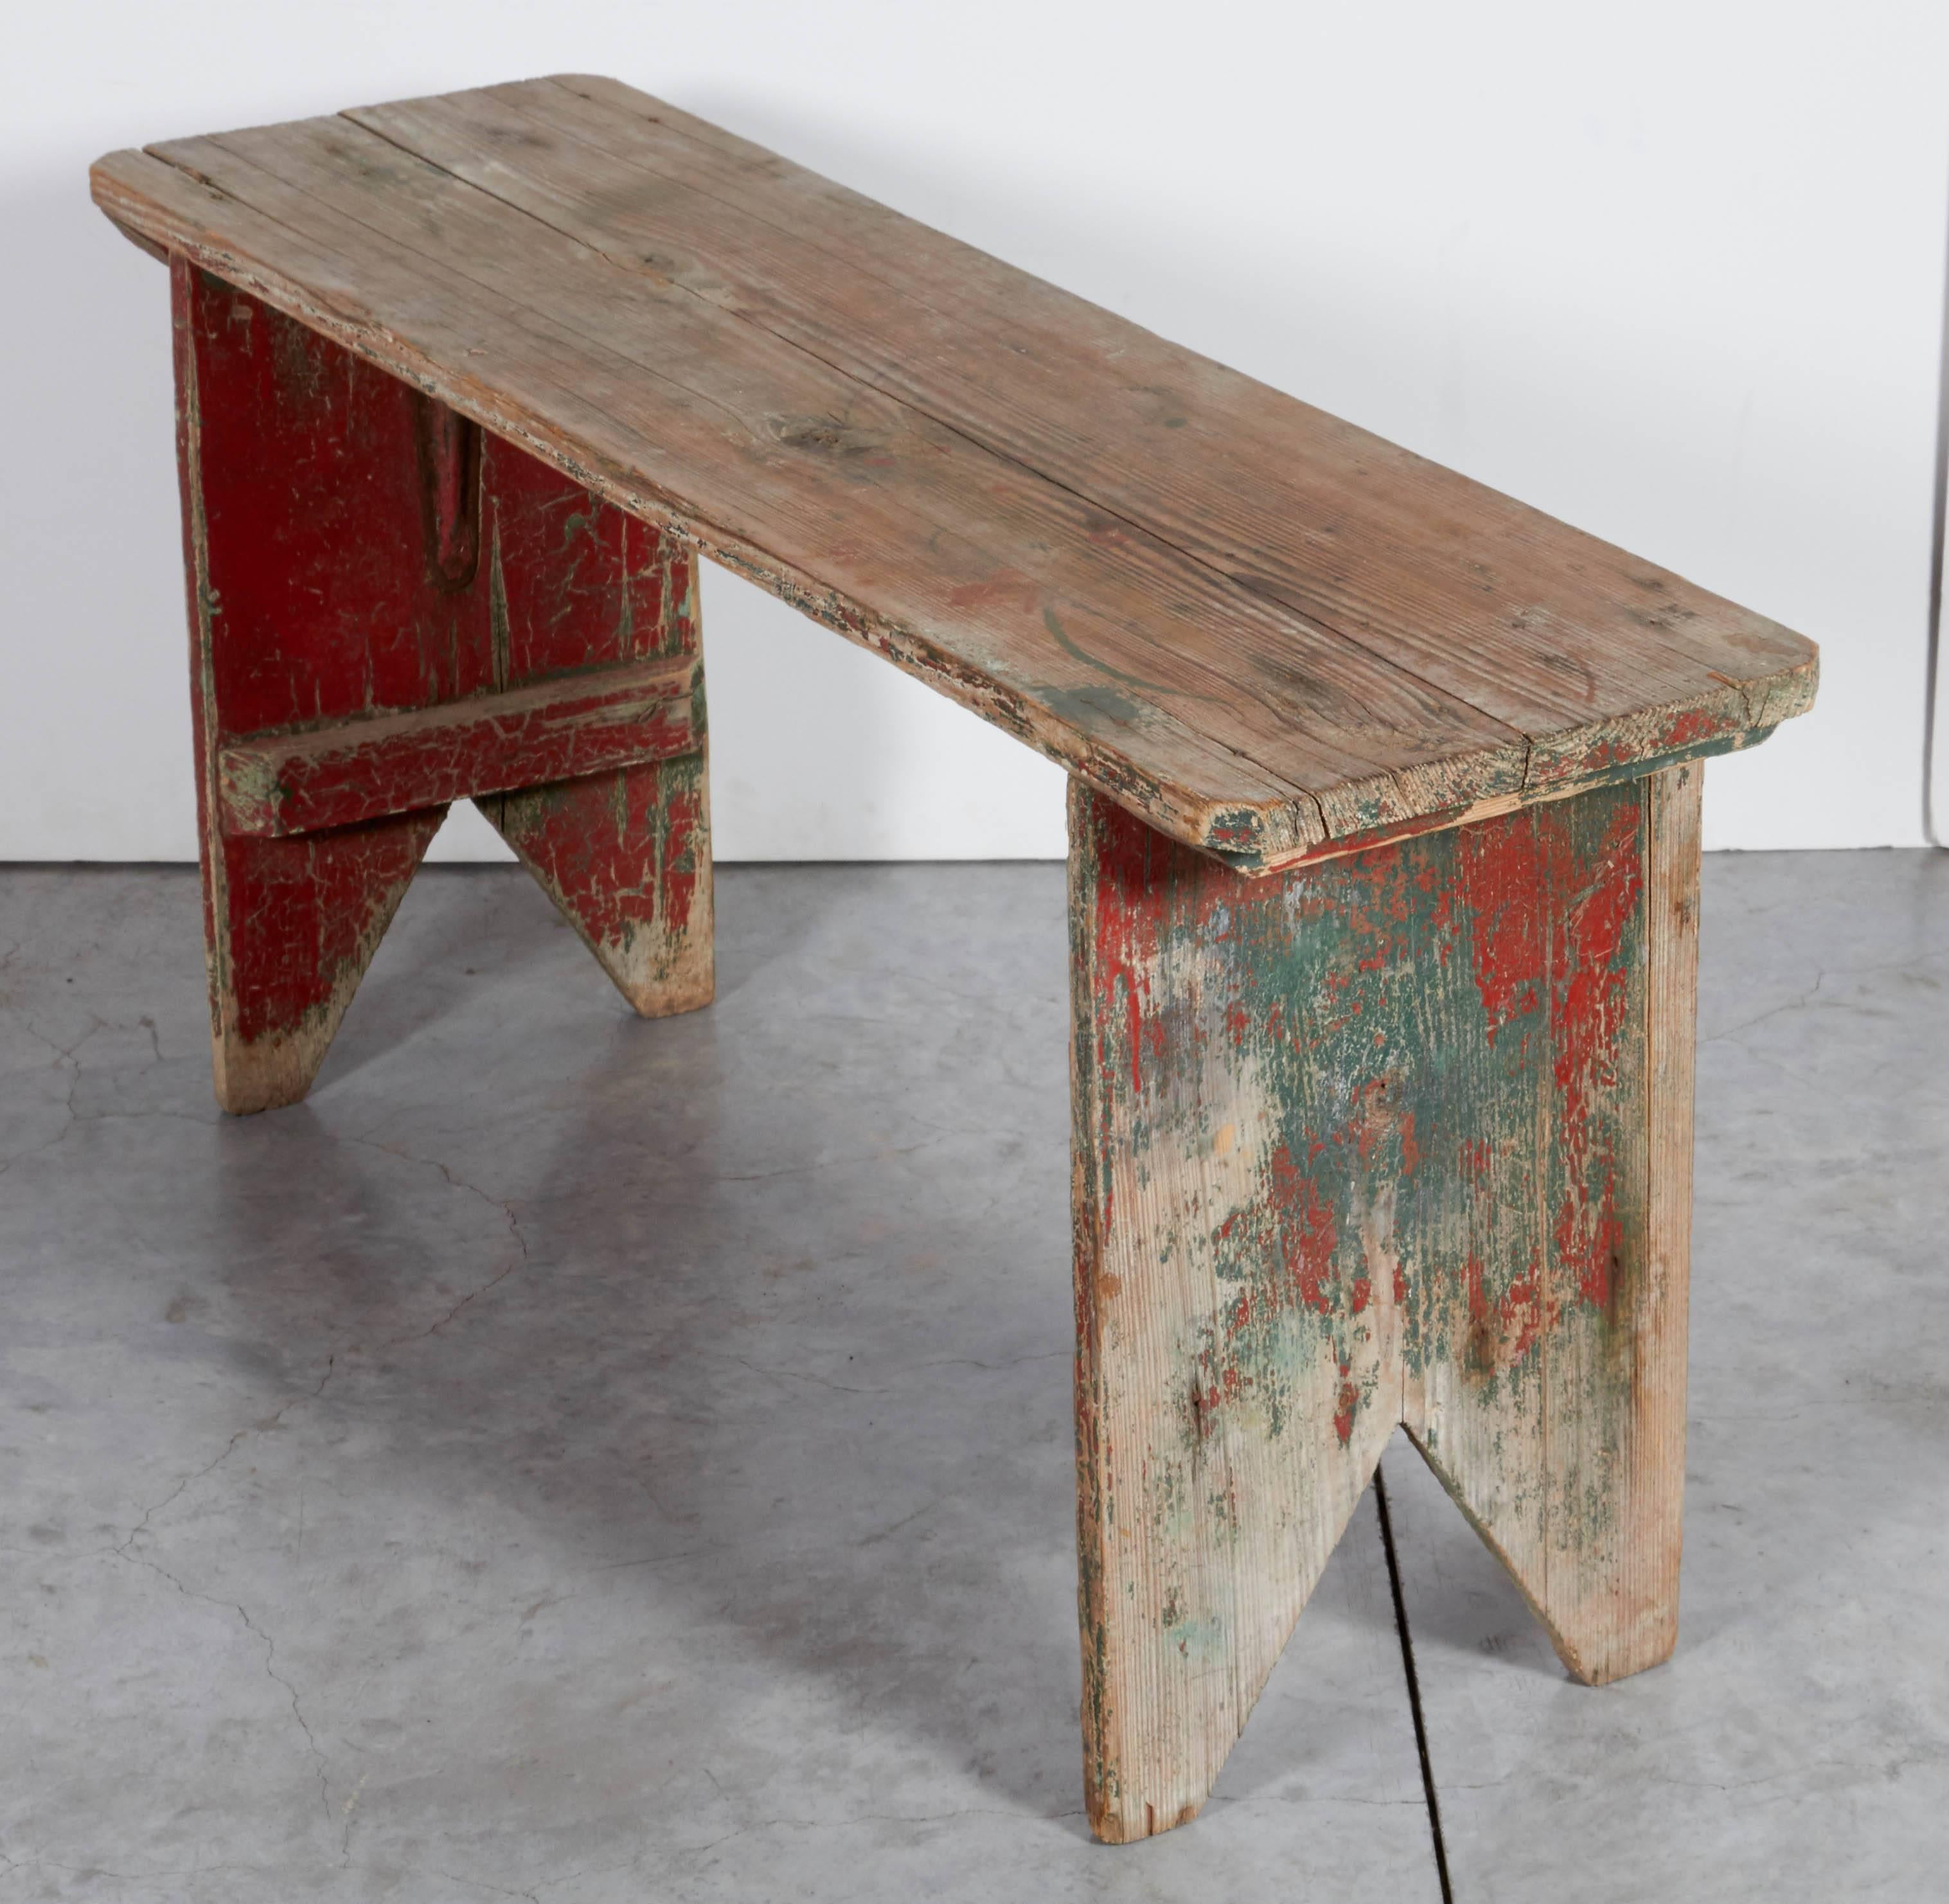 This simple, primitive bench displays years of wear and faded old red and green paint on the legs. This makes a great, colorful accent piece in an entryway or low table for displaying objects or magazines.
BN104.

a b h a y a  in TriBeCa 